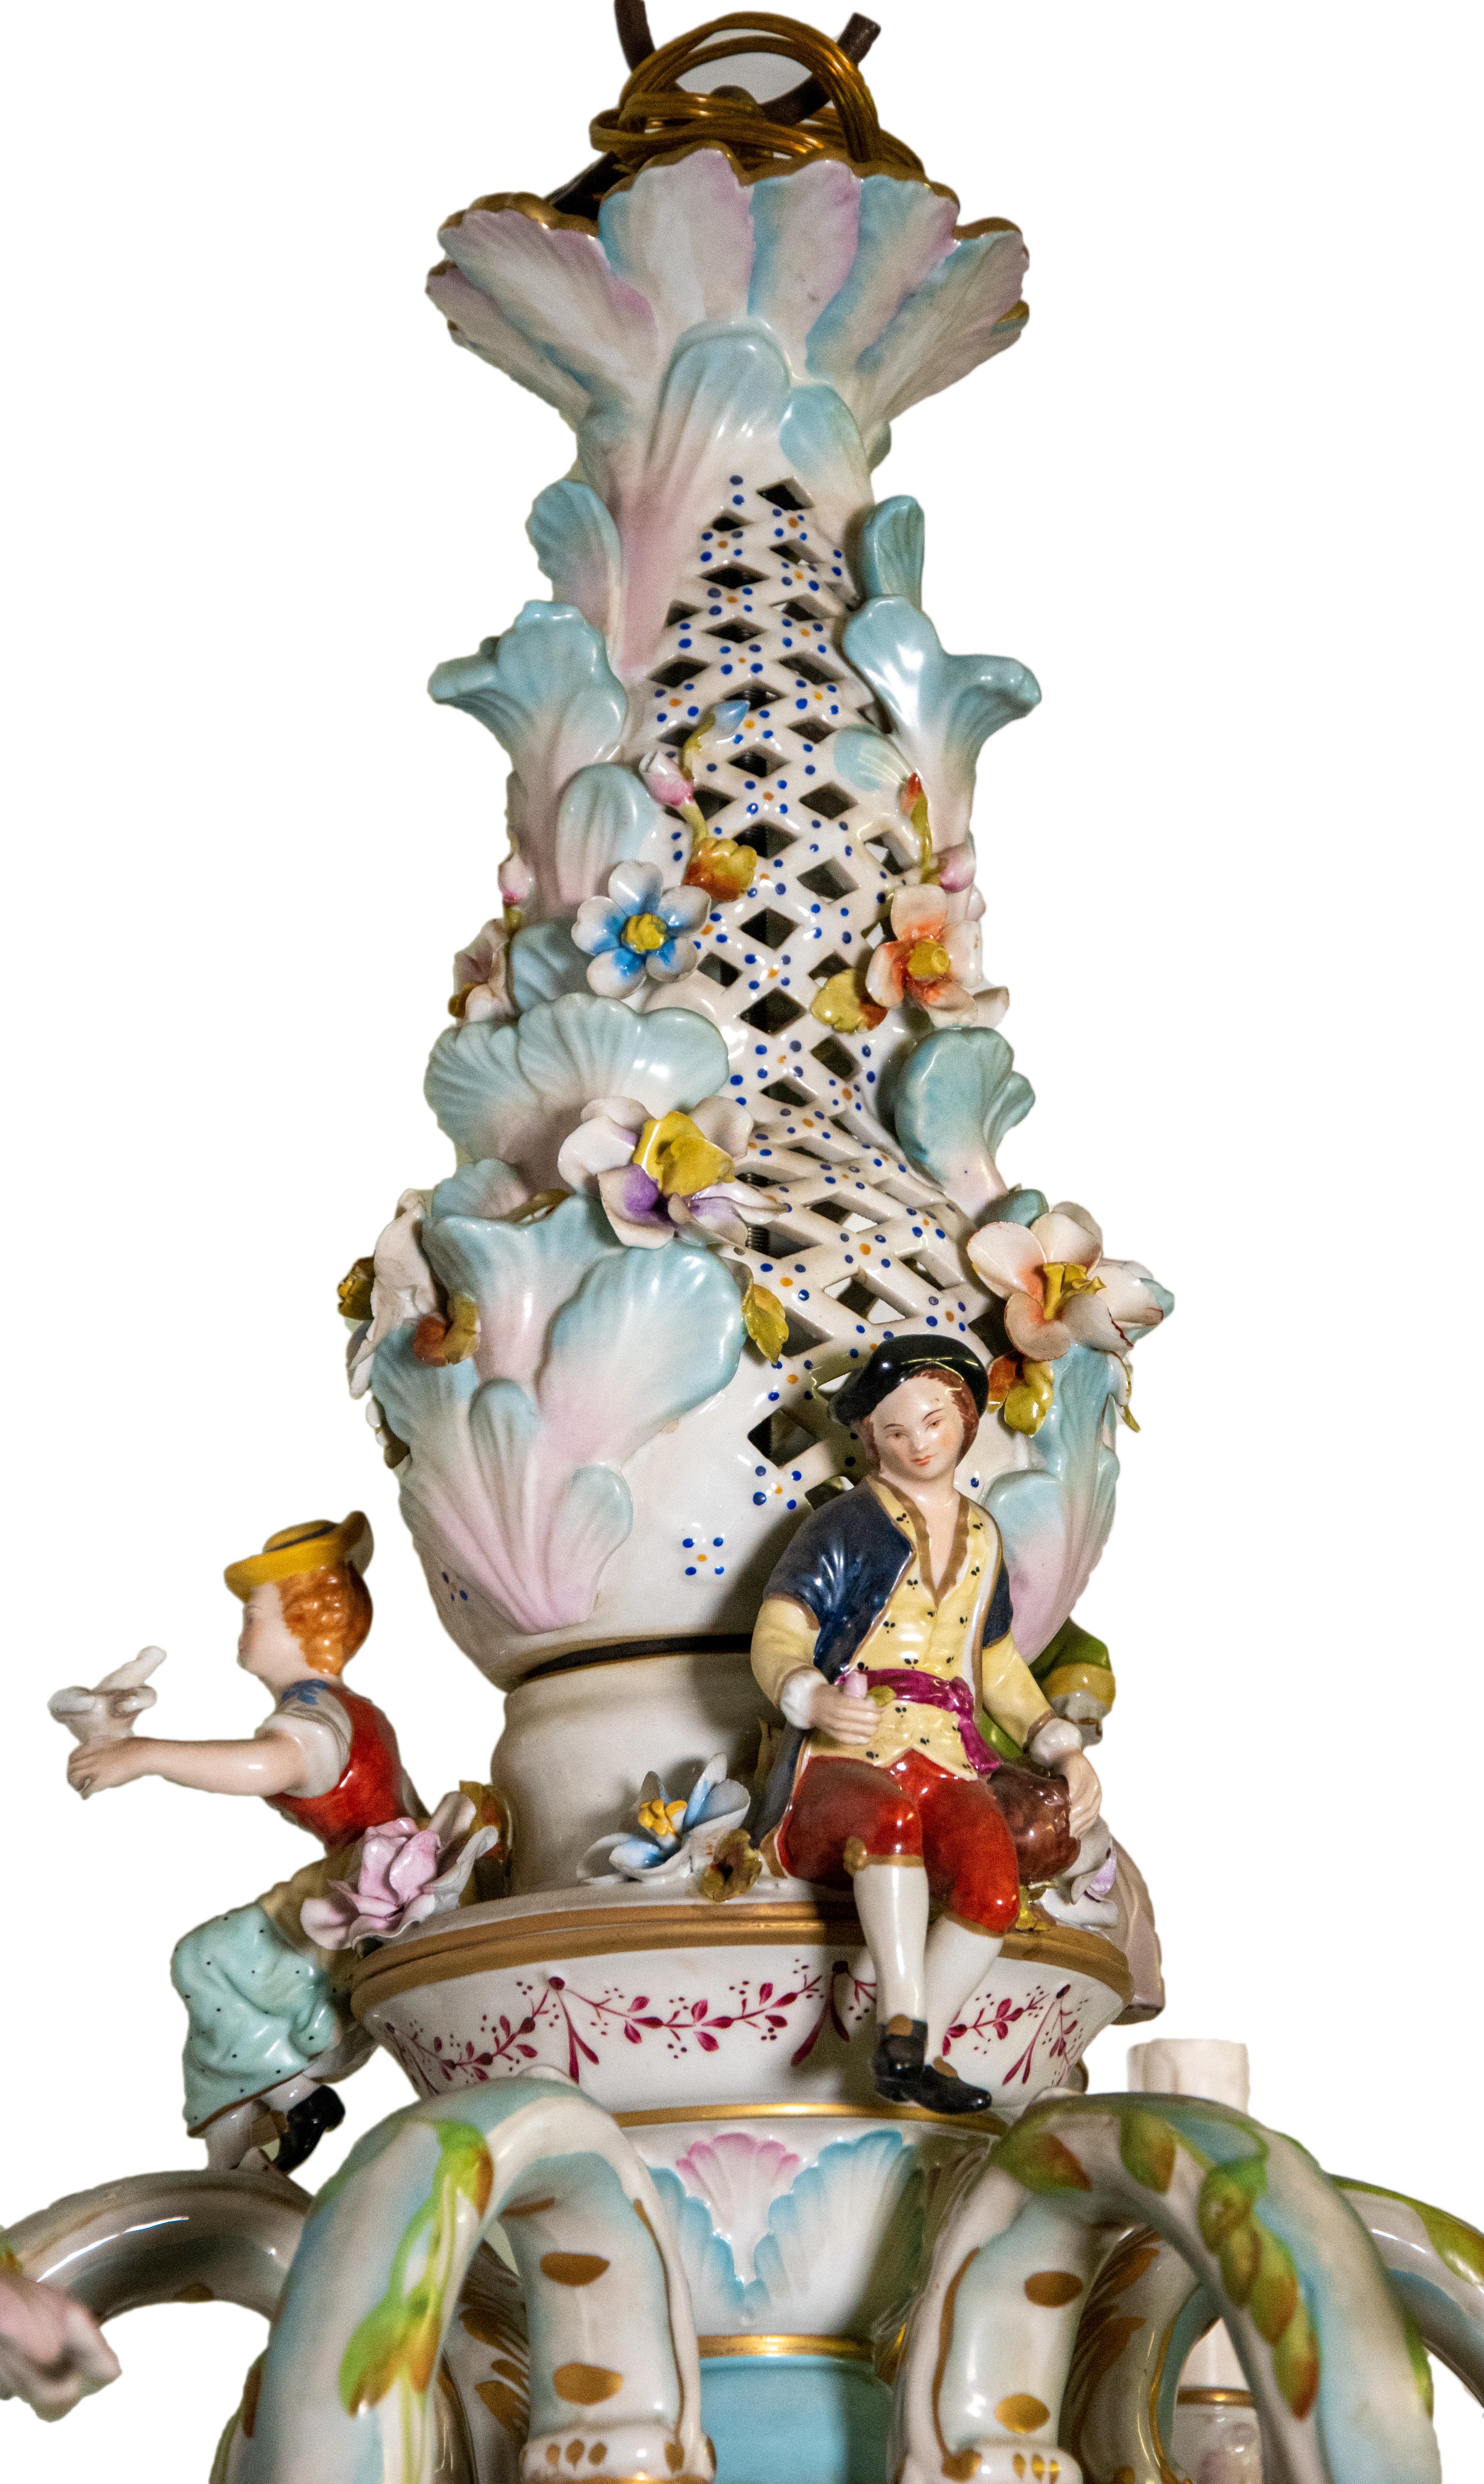 Very beautifull chandelier in CAPODIMONTE porcelain twelve lights in two tiers
The shaft is entierely in openwork porcelain of remarkable finesse on the top of the chandelier with characters representing charming workers of this time ,the woman